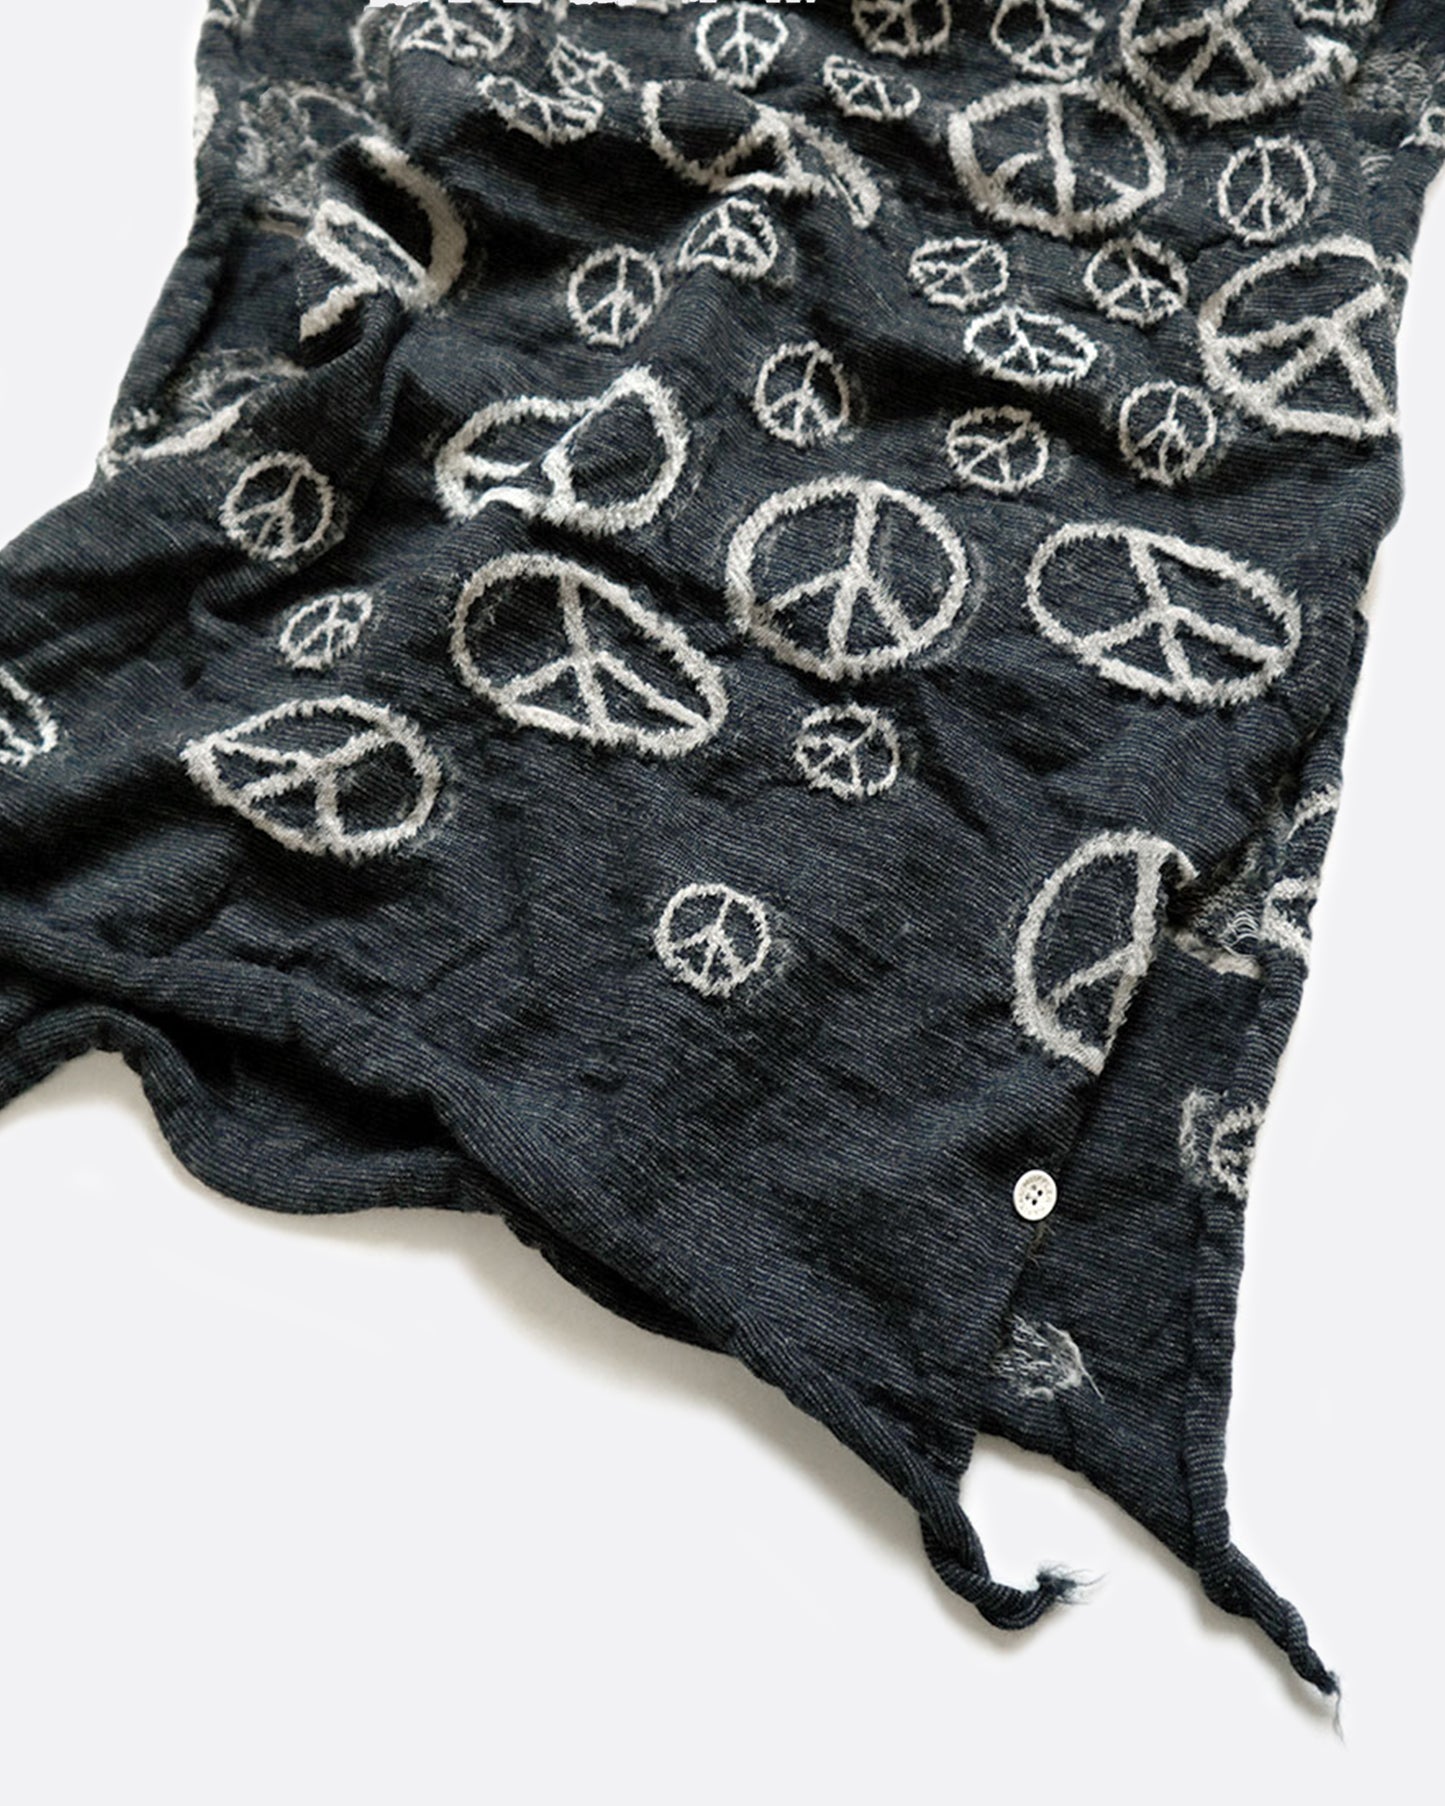 A close up of the ends of a black wool scarf with white peace signs.